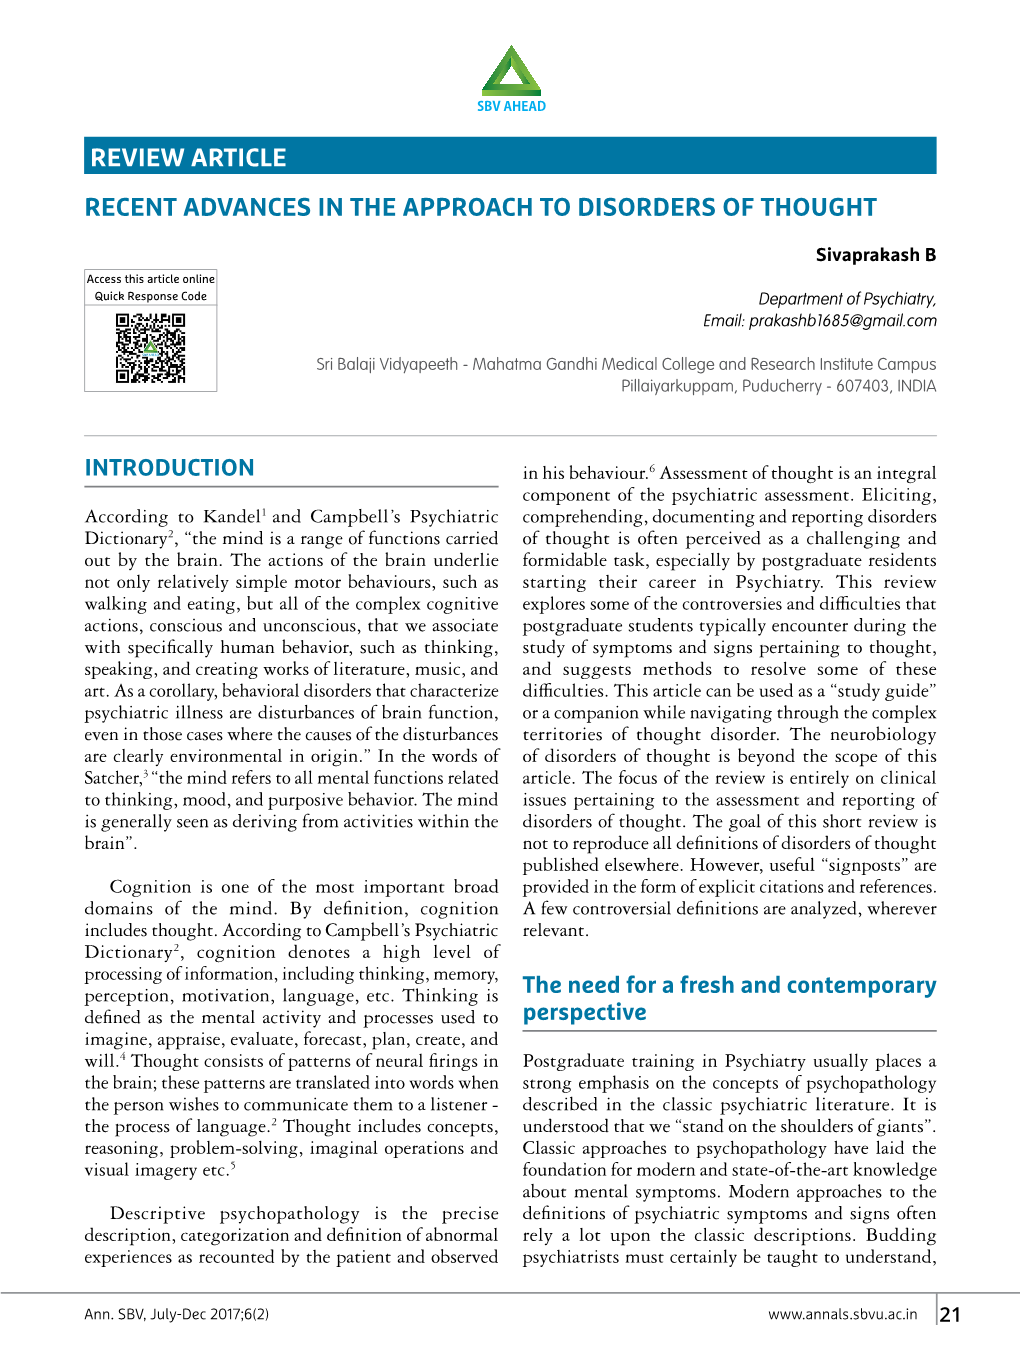 Recent Advances in the Approach to Disorders of Thought